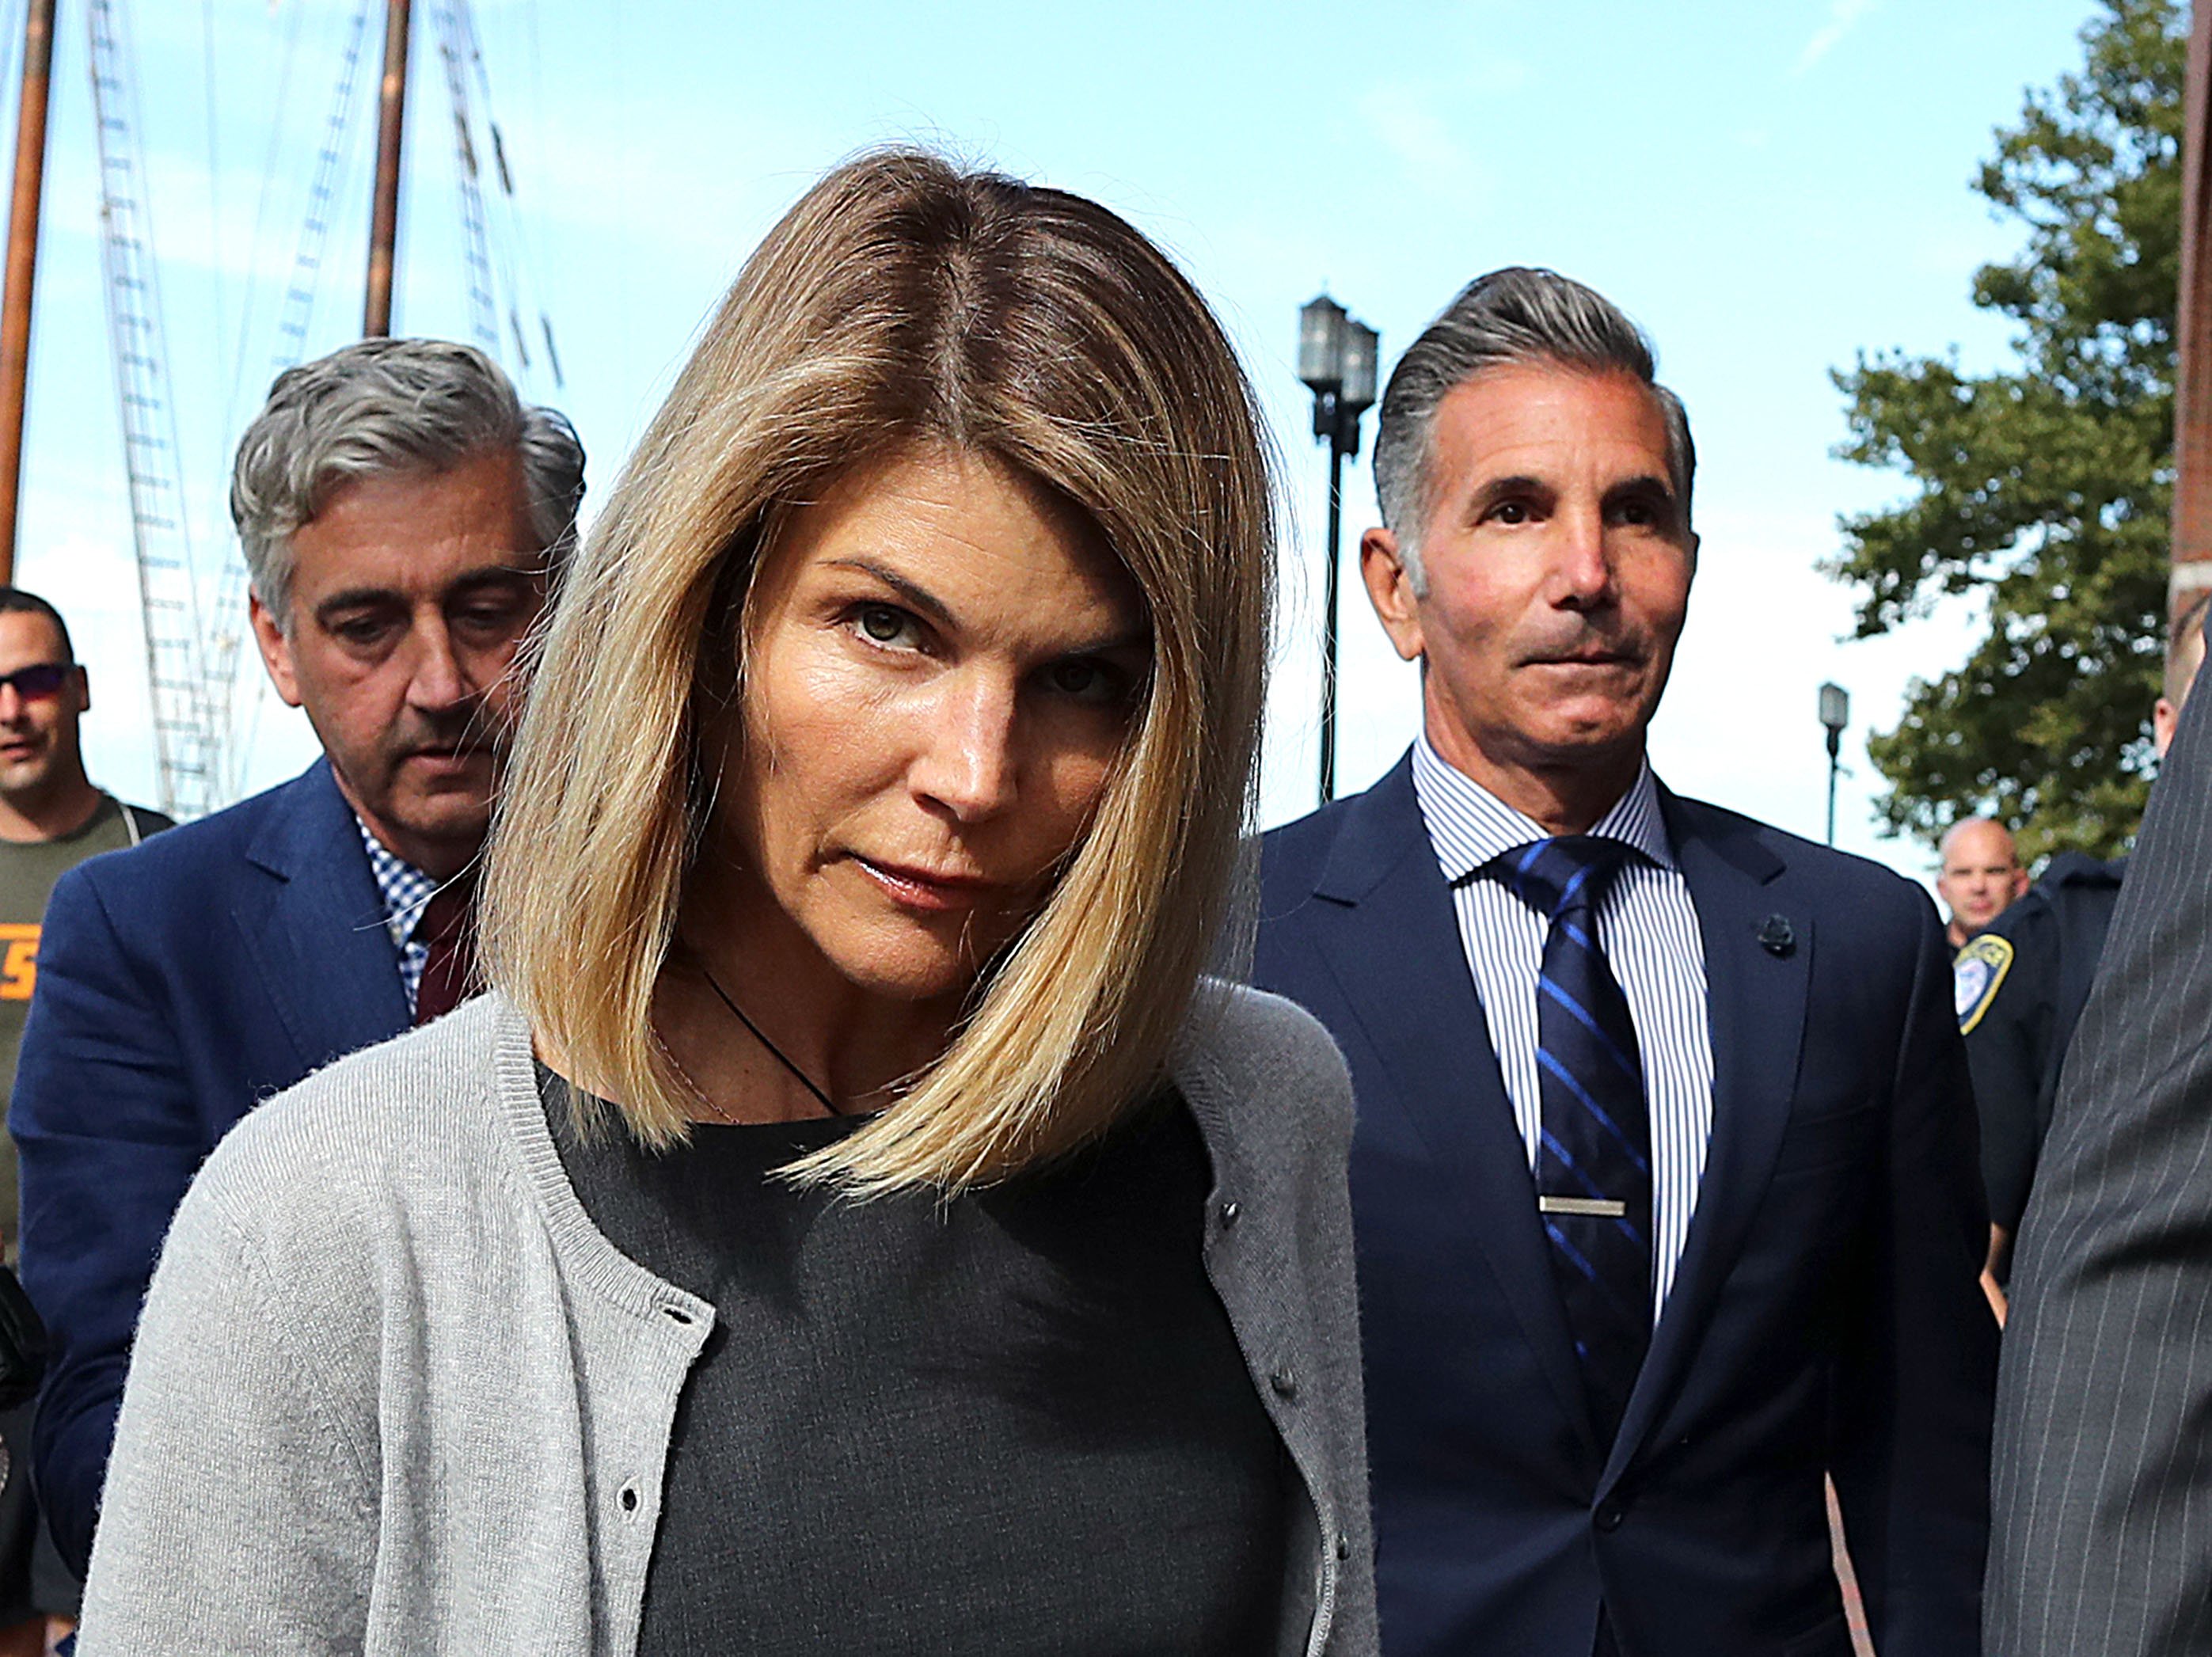 Lori Loughlin and her husband Mossimo Giannulli leave the John Joseph Moakley United States Courthouse in Boston on August. 27, 2019. | Photo: Getty Images.